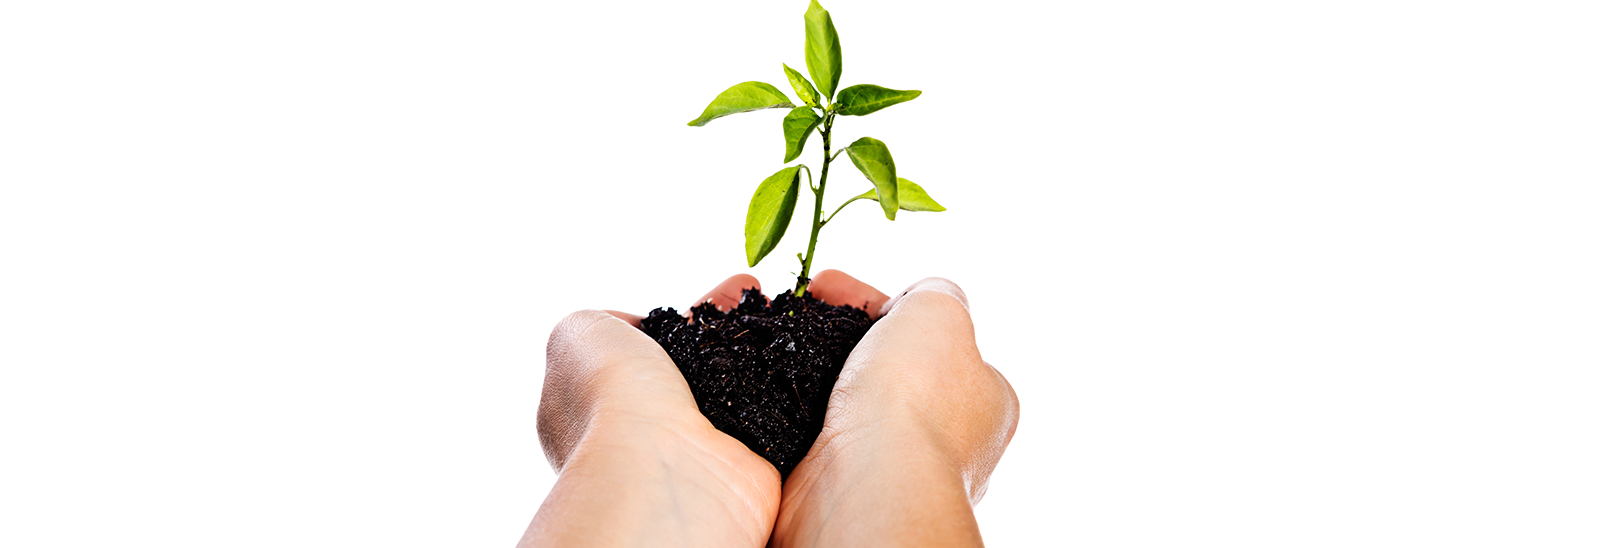 Image of hands holding a seedling.